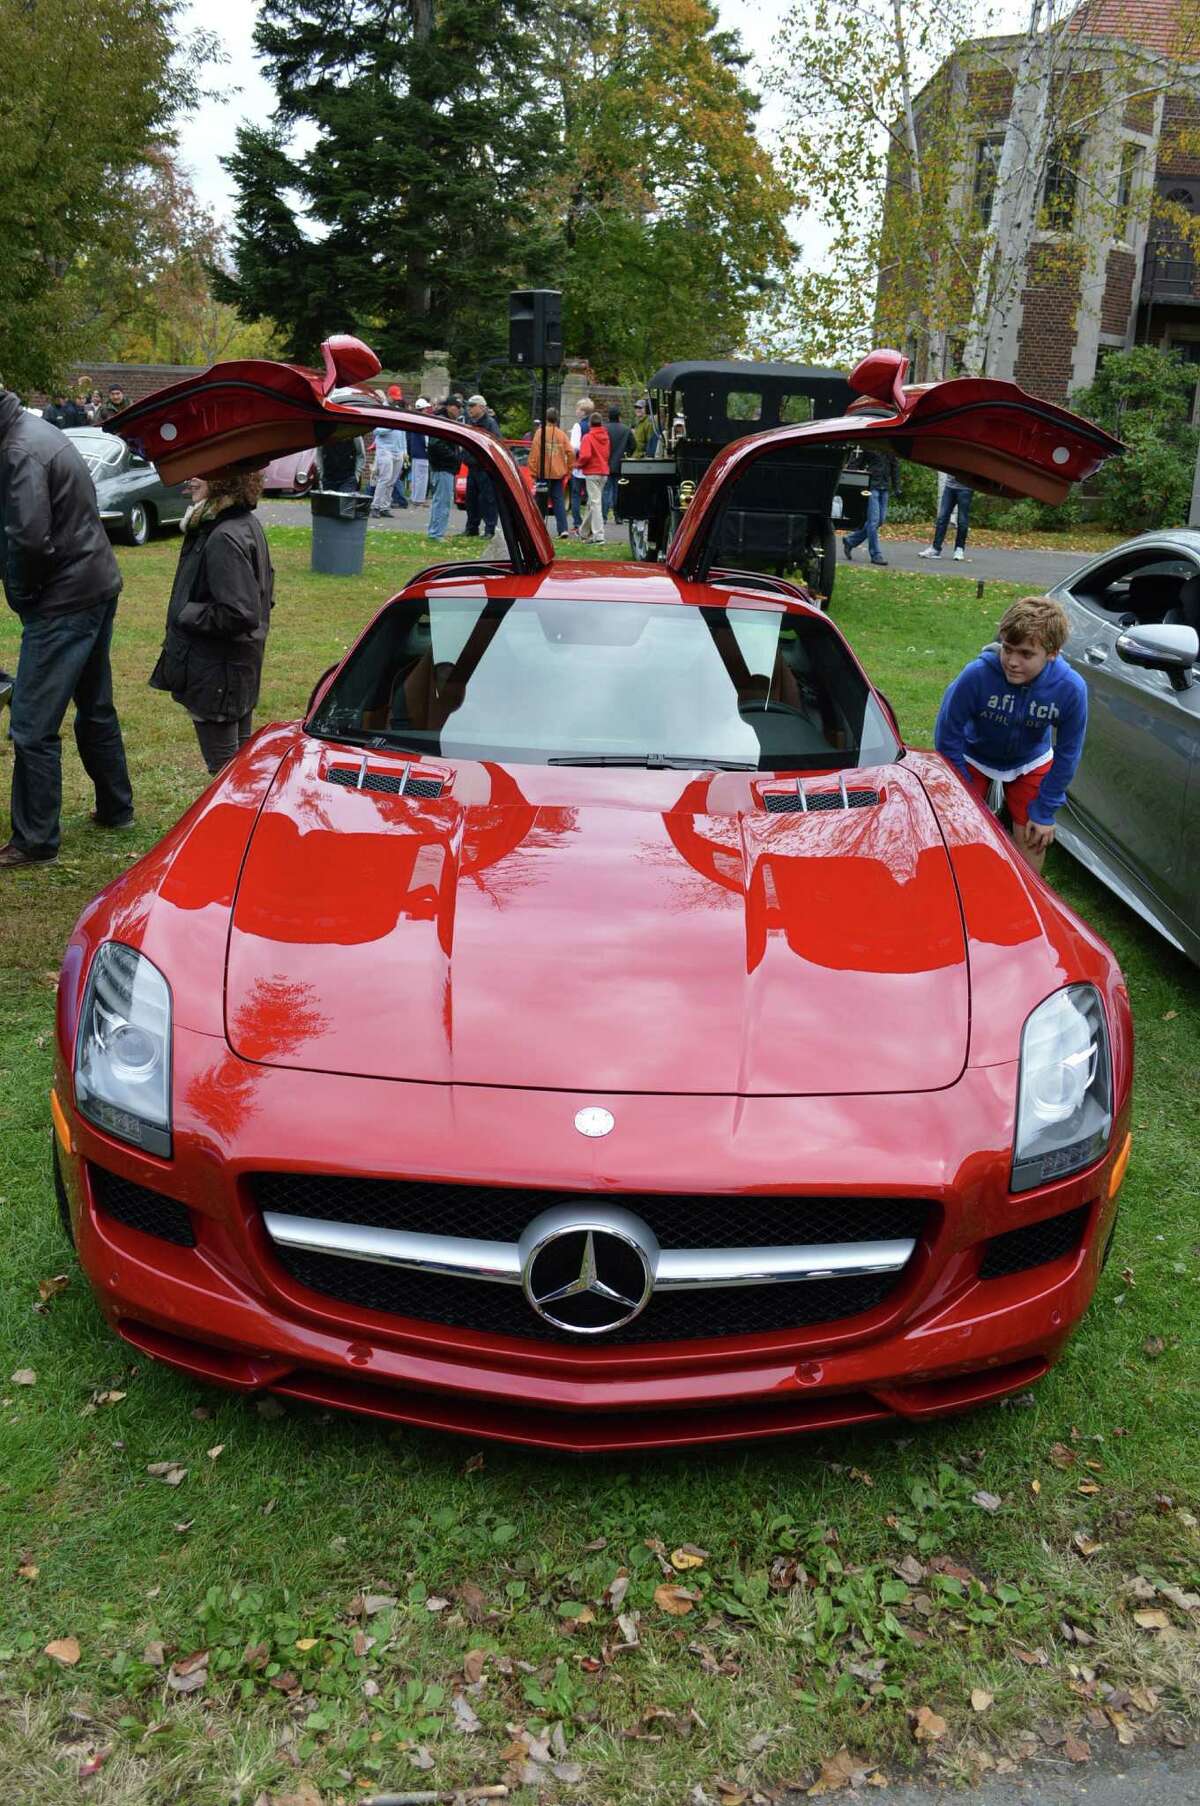 This red Mercedes attention drew close attention from many attendees at Sunday's Caffeine & Carburetors.